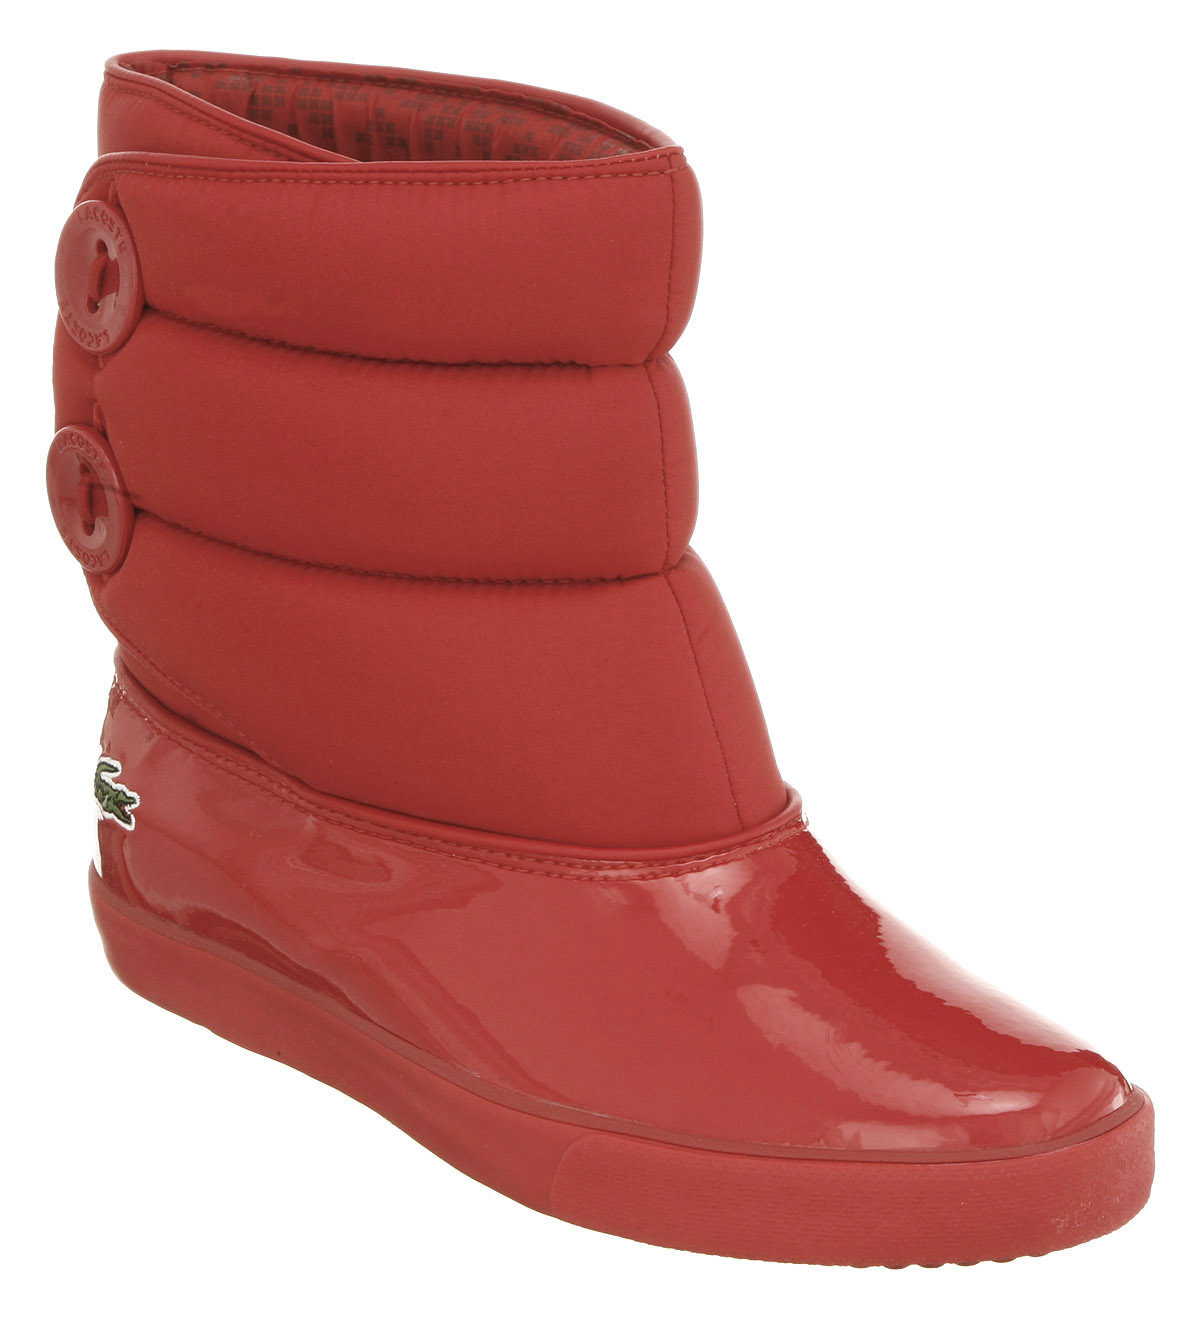 lacoste snow boots